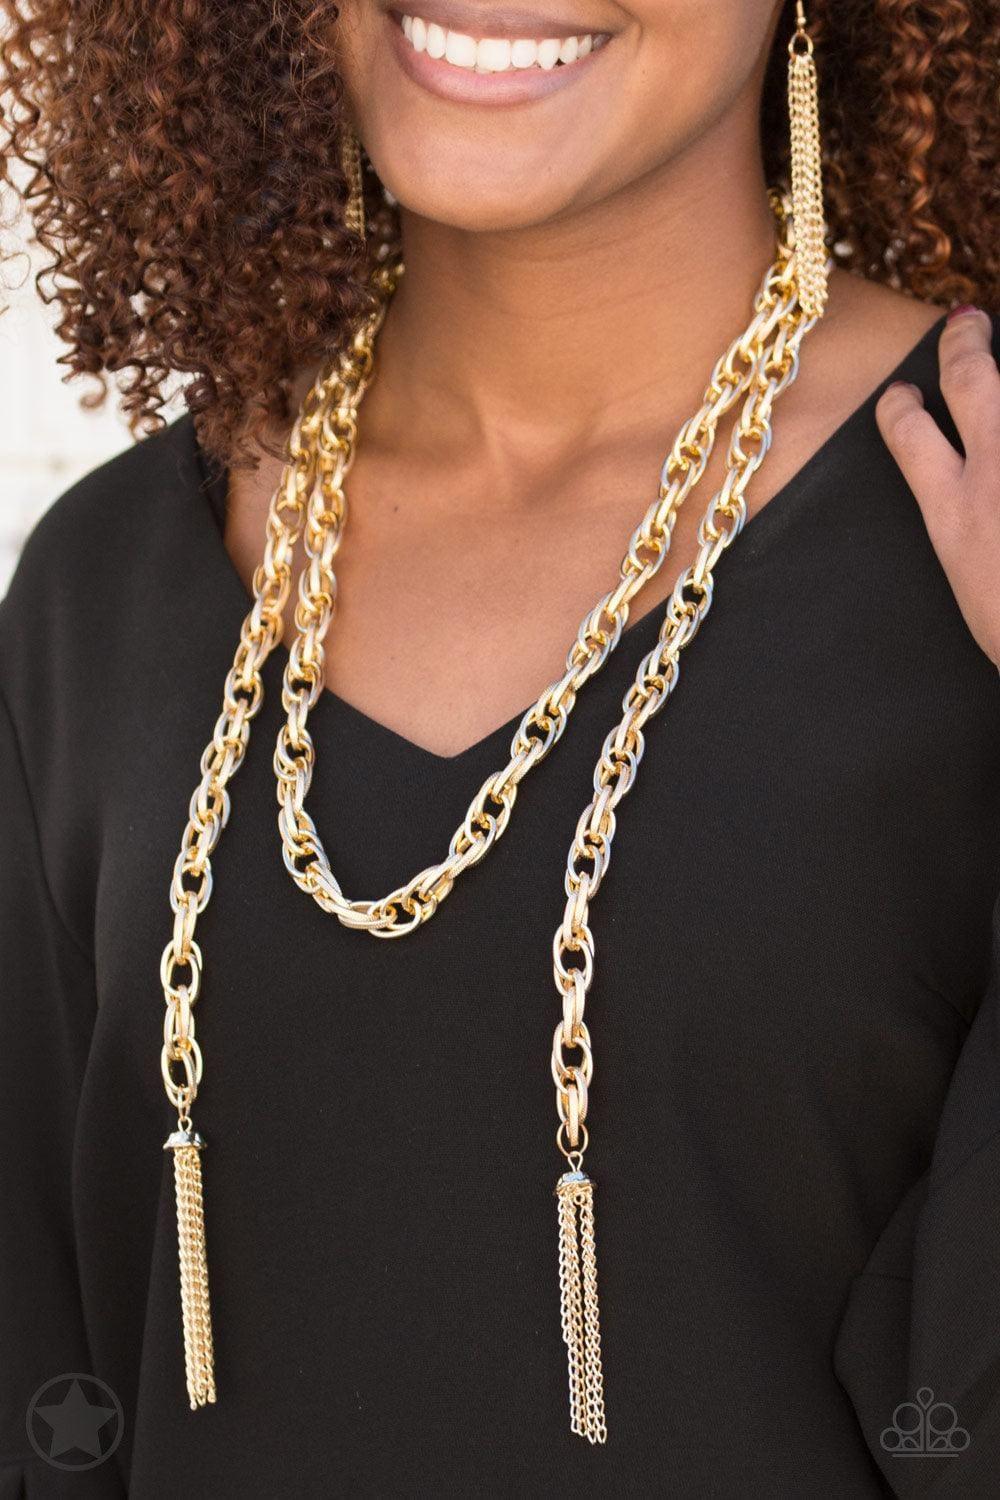 Paparazzi Accessories - Paparazzi Blockbuster Necklace: Scarfed For Attention Gold - Bling by JessieK